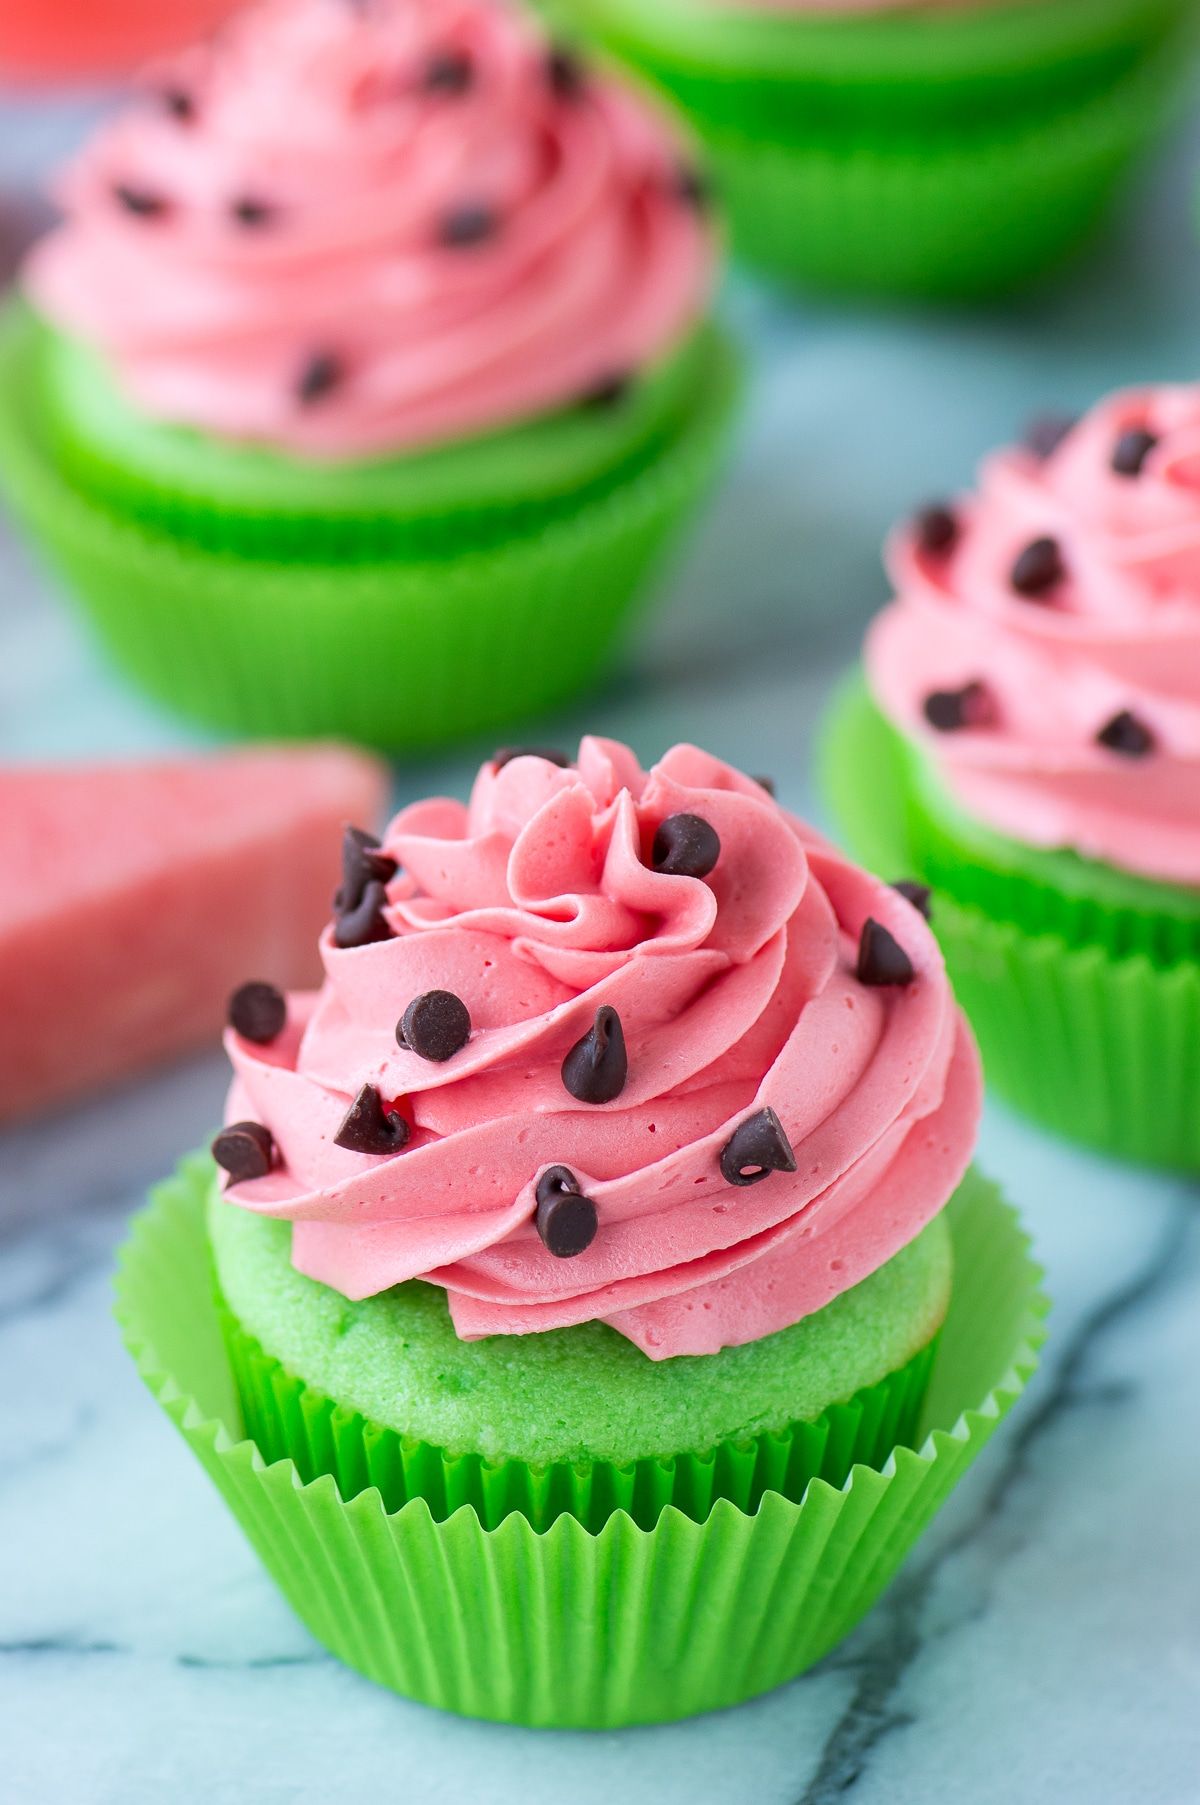 15 Best Cupcake Decorating Ideas - How to Decorate Cupcakes